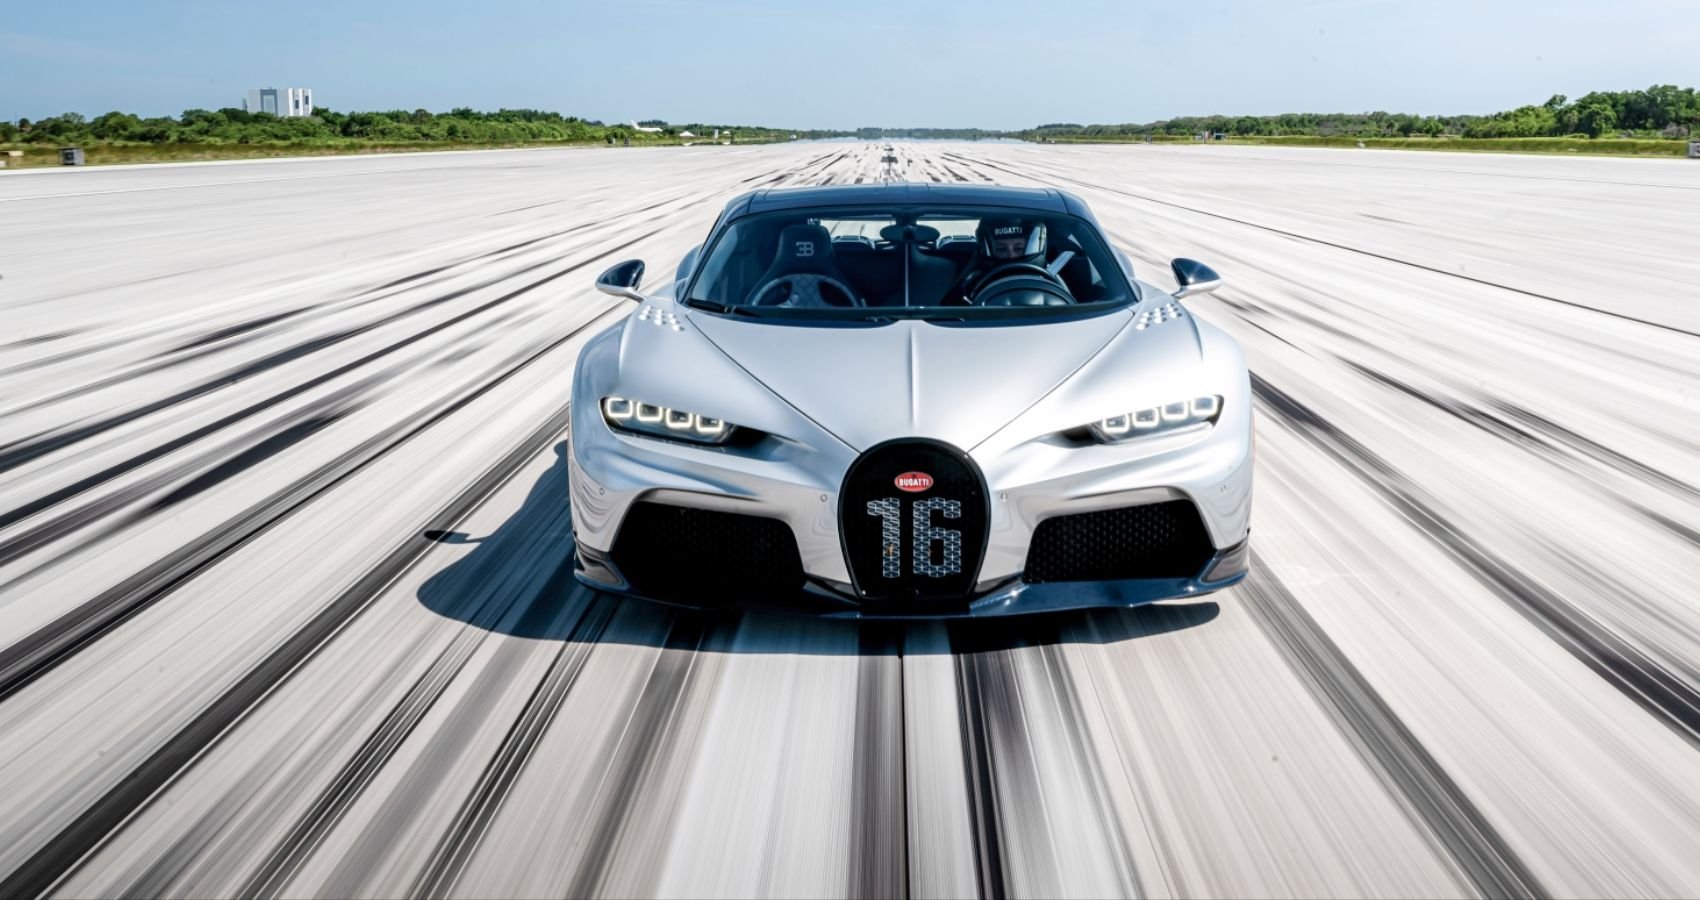 Bugatti Chiron Customers Break The 250 MPH Barrier On The Space Shuttle’s Runway